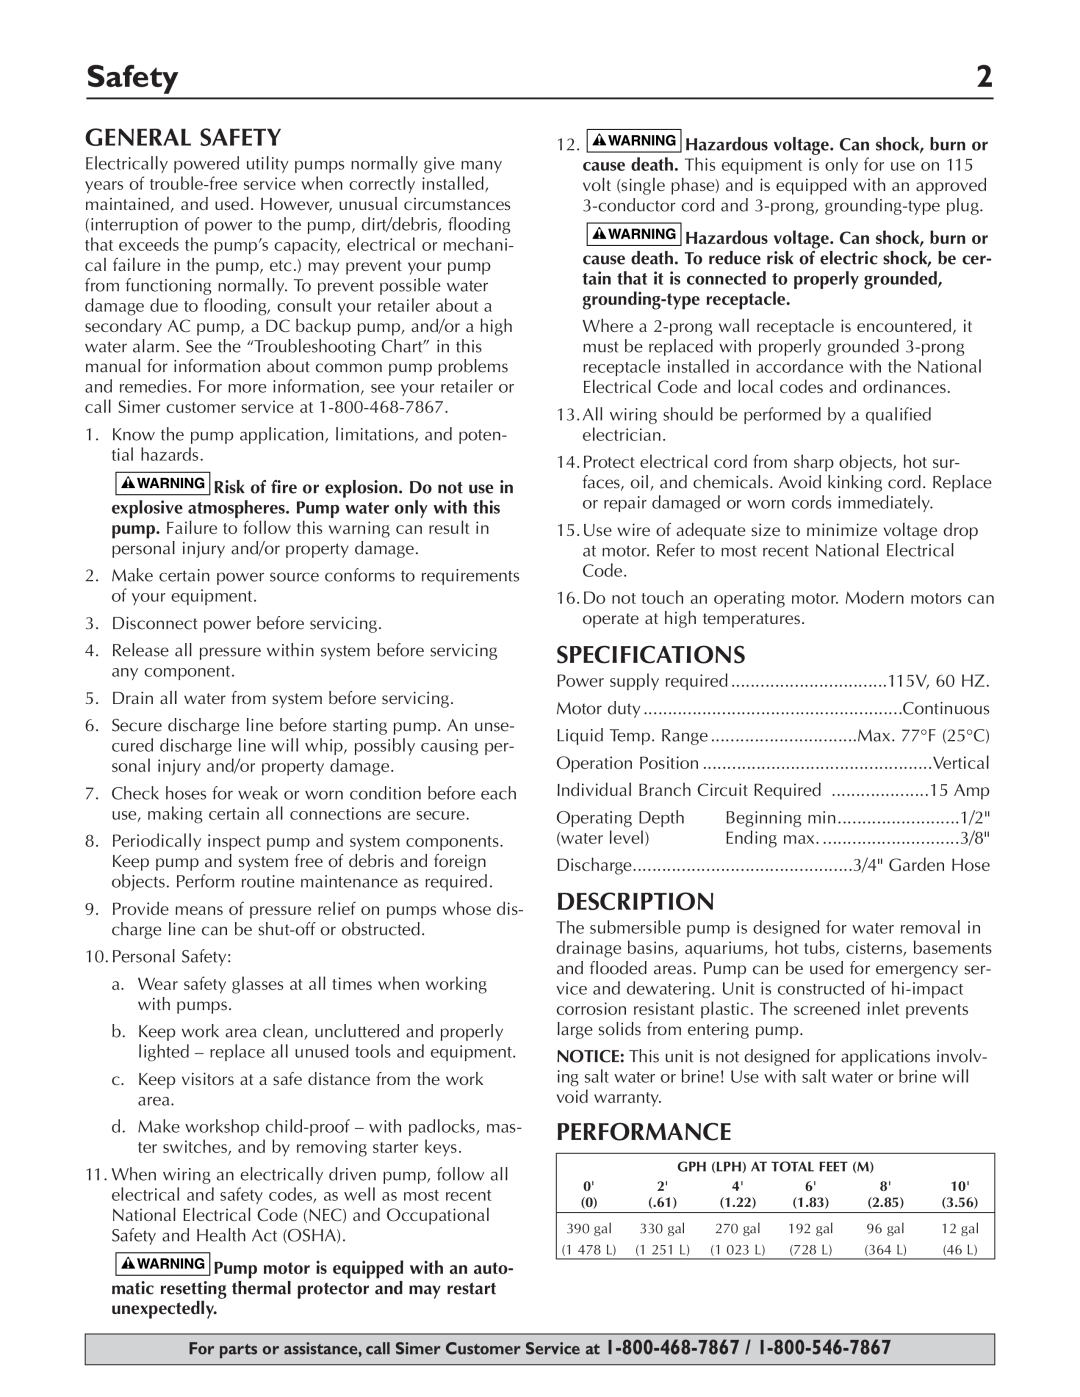 Simer Pumps 2110 owner manual General Safety, Specifications, Description, Performance 